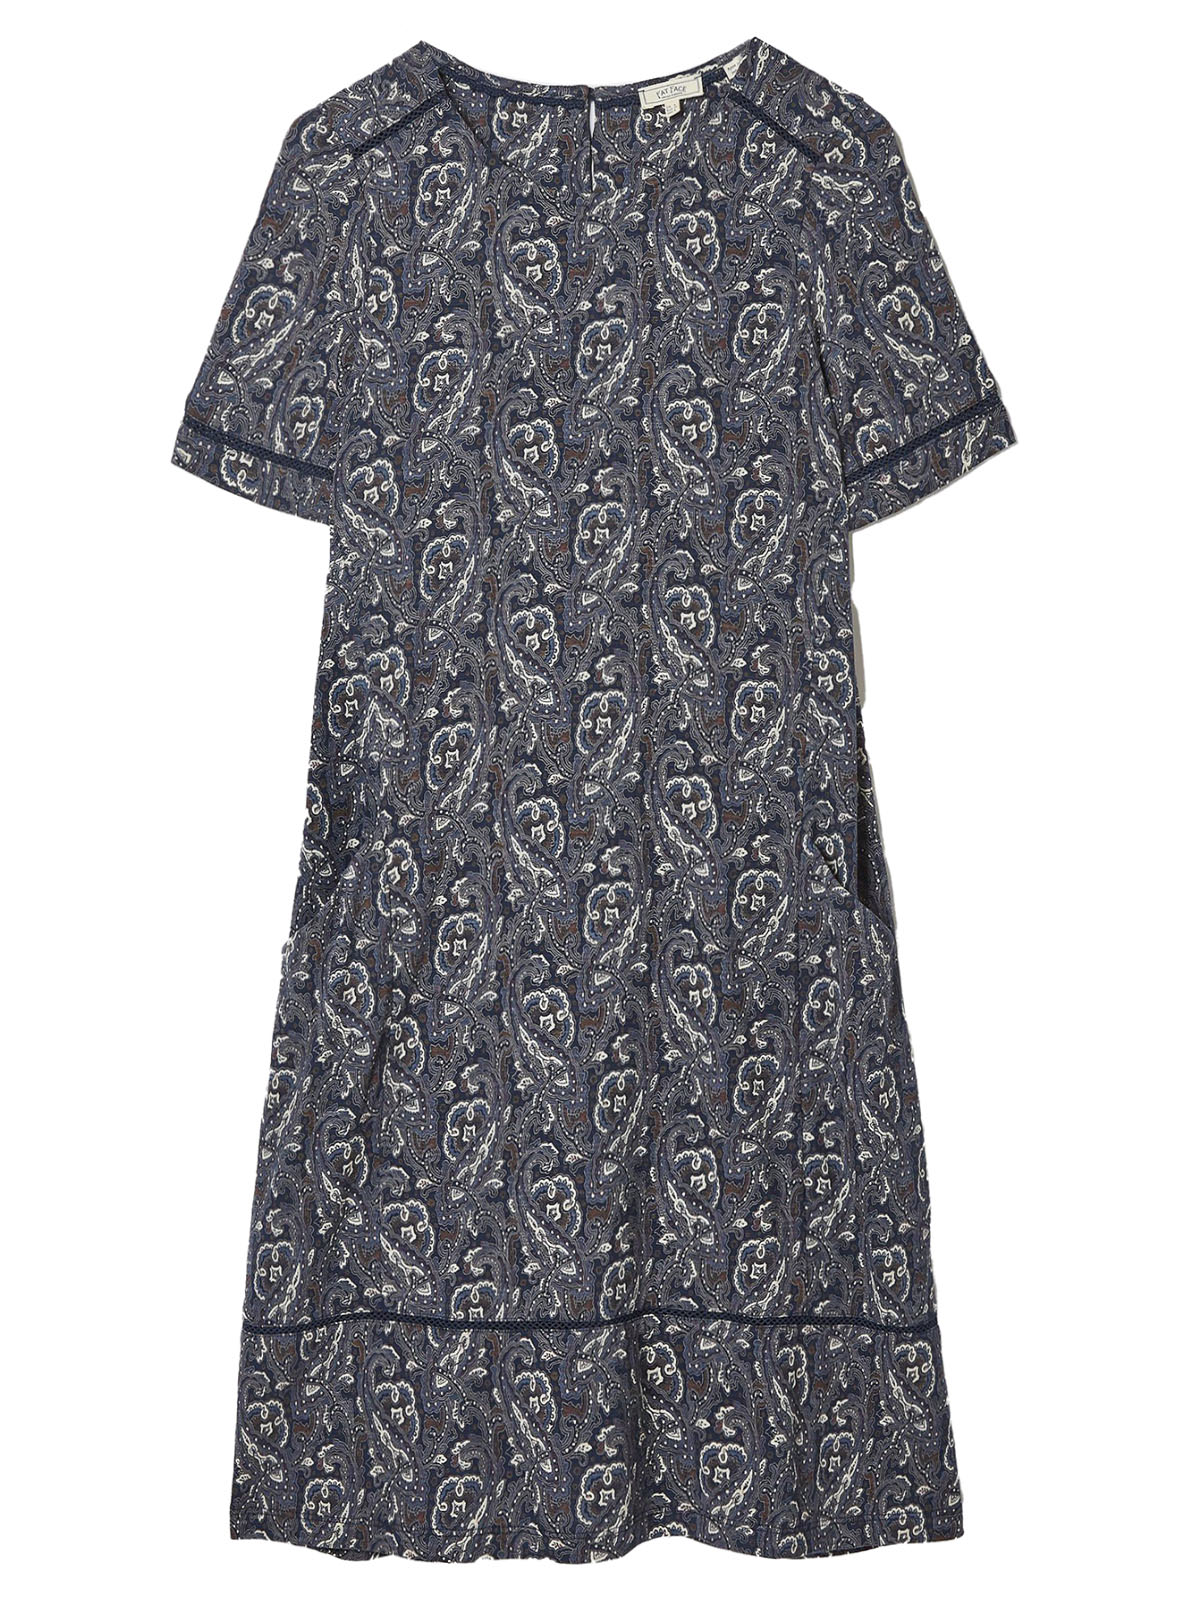 FAT FACE - - Fat Face NAVY Simone Paisley Jersey Dress - Size 12 to 14